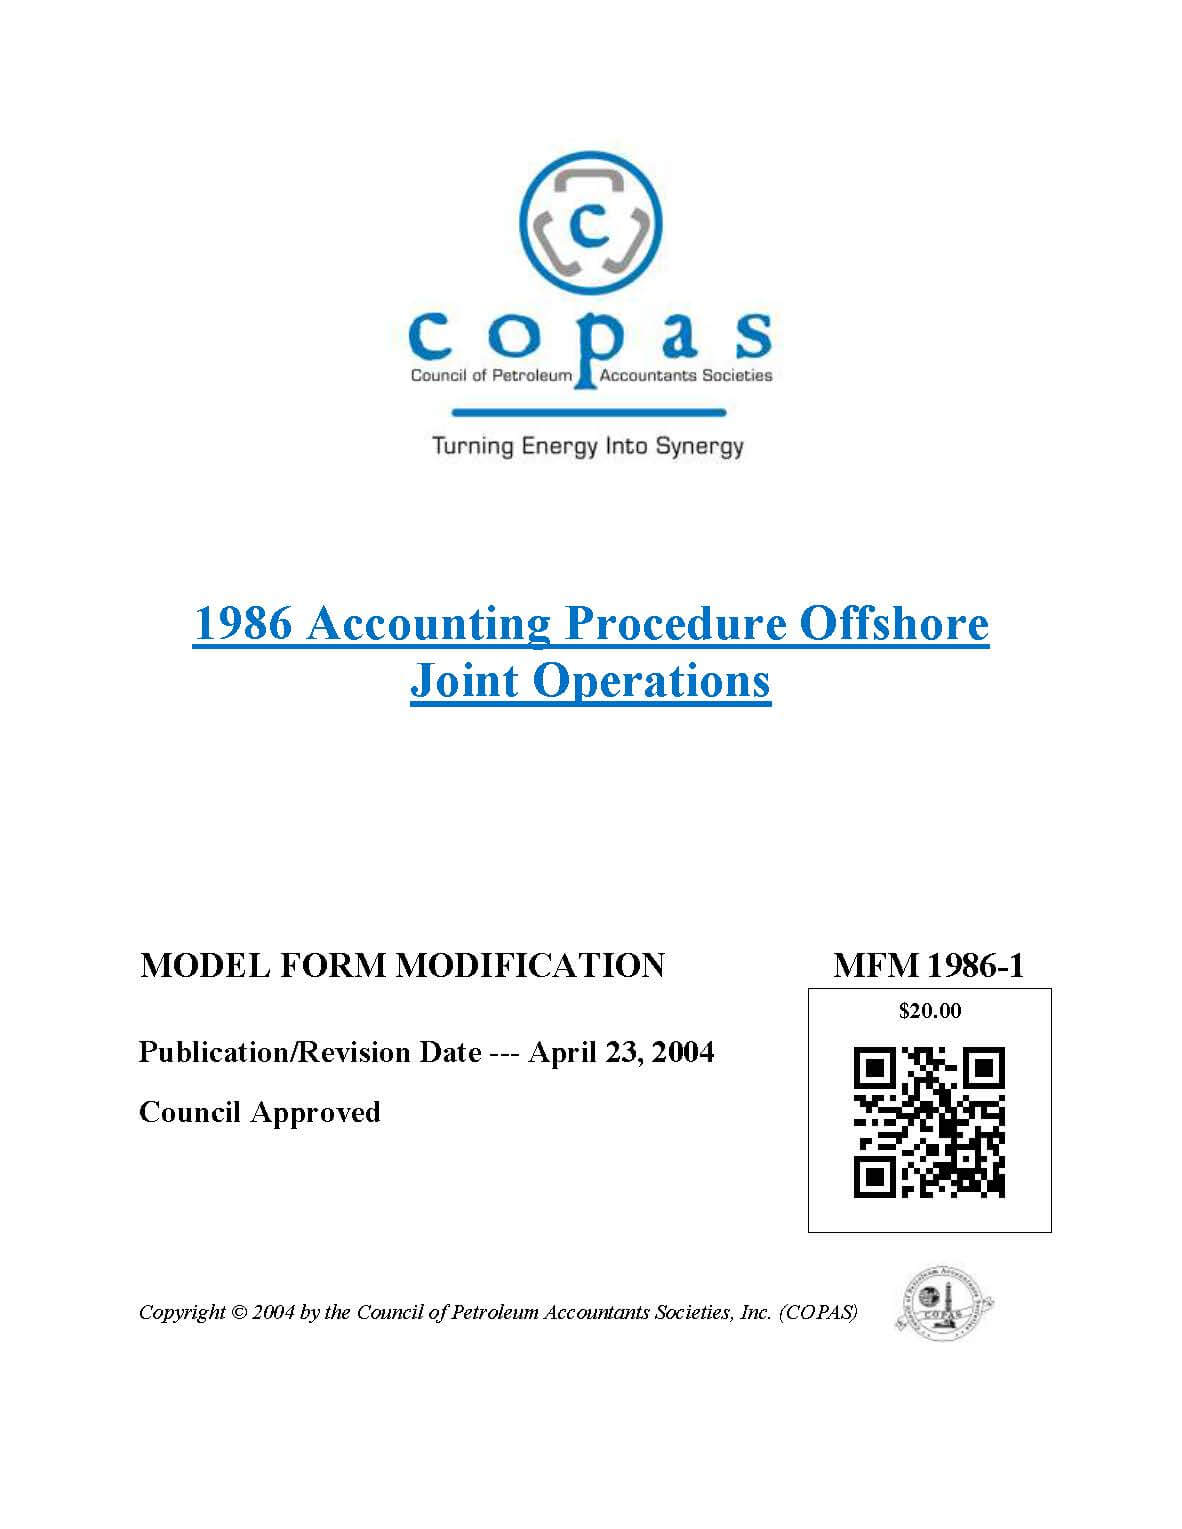 MFM-1986-1 1986 Accounting Procedure Offshore Joint Operations Model Form Modification